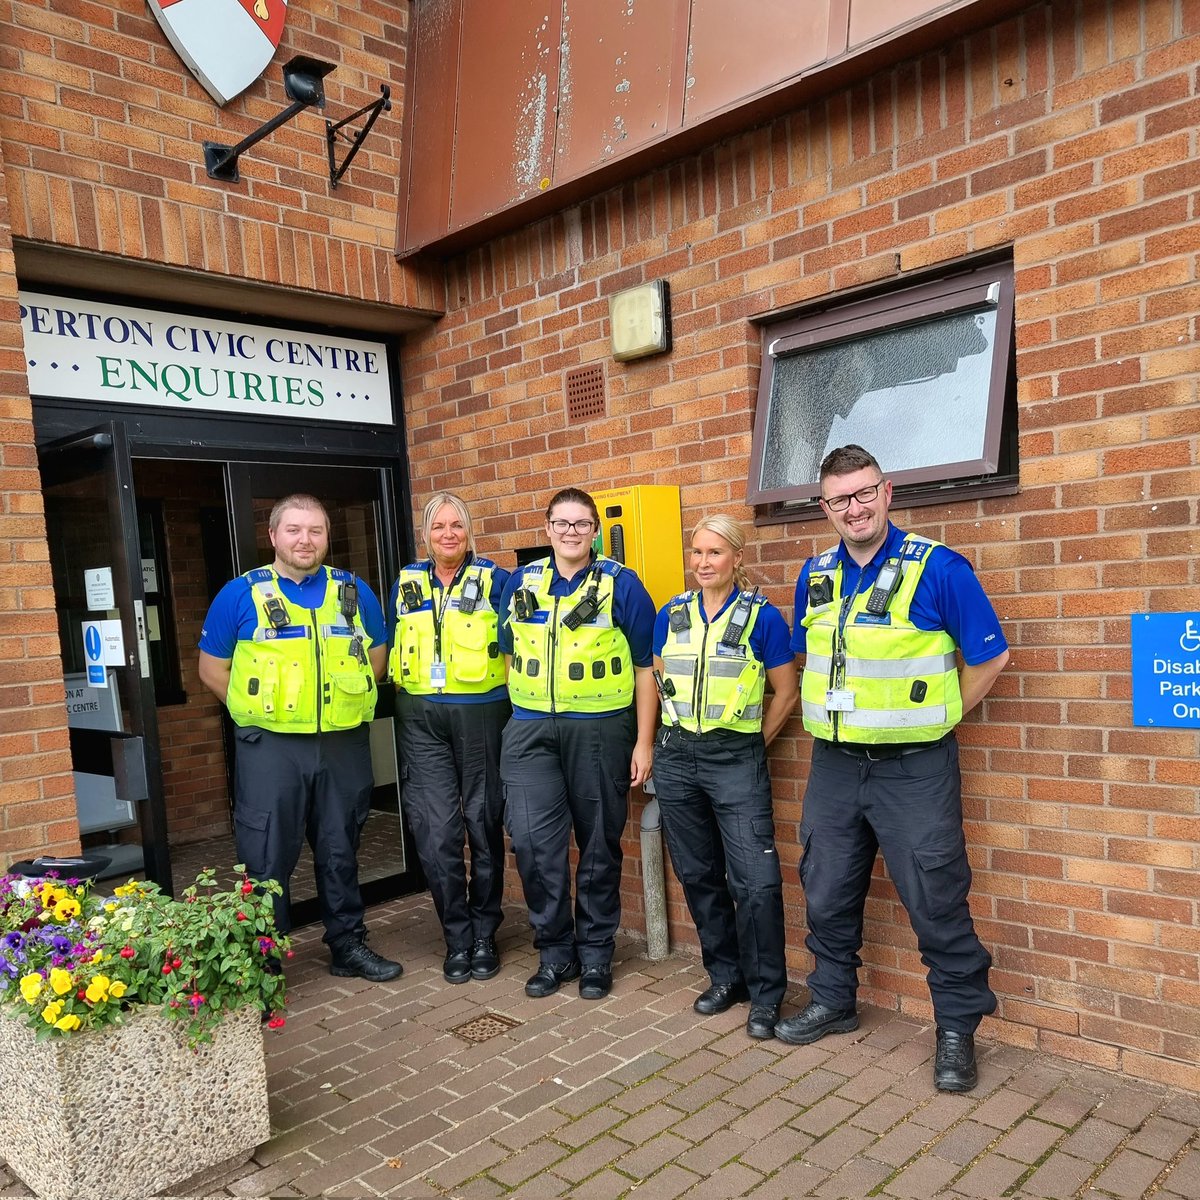 Tettenhall PCSOs have met with Staffordshire PCSOs today to discuss crime trends and cross border crime. #jointworking #SStaffs